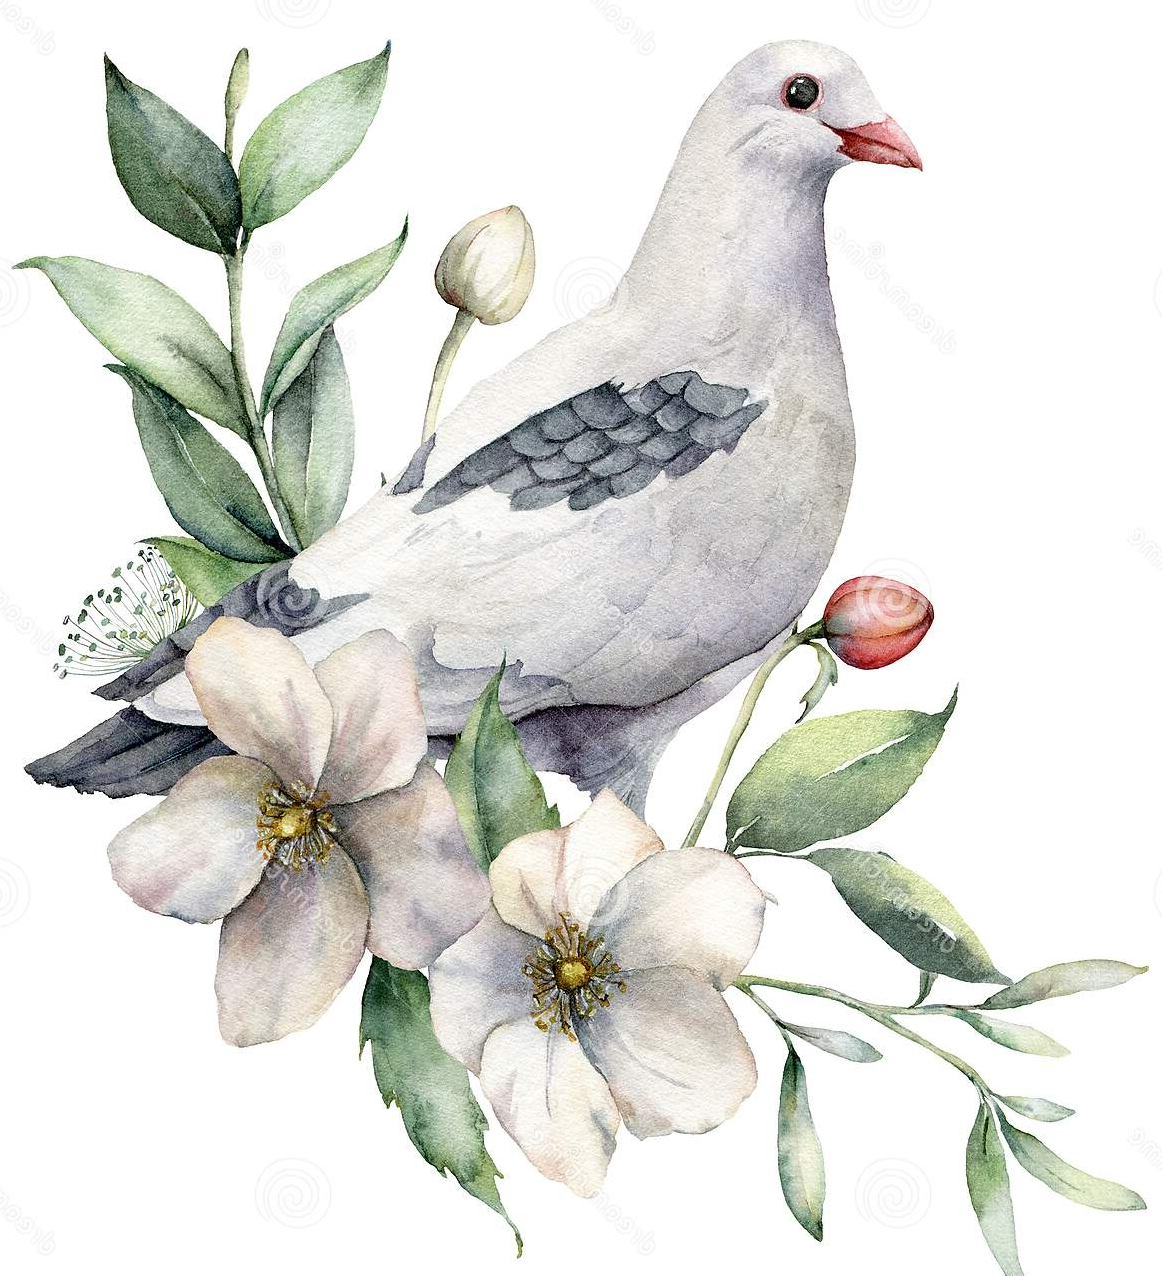 watercolor-spring-illustration-bouquet-anemones-dove-hand-painted-birds-flowers-isolated-white-watercolor-170923853